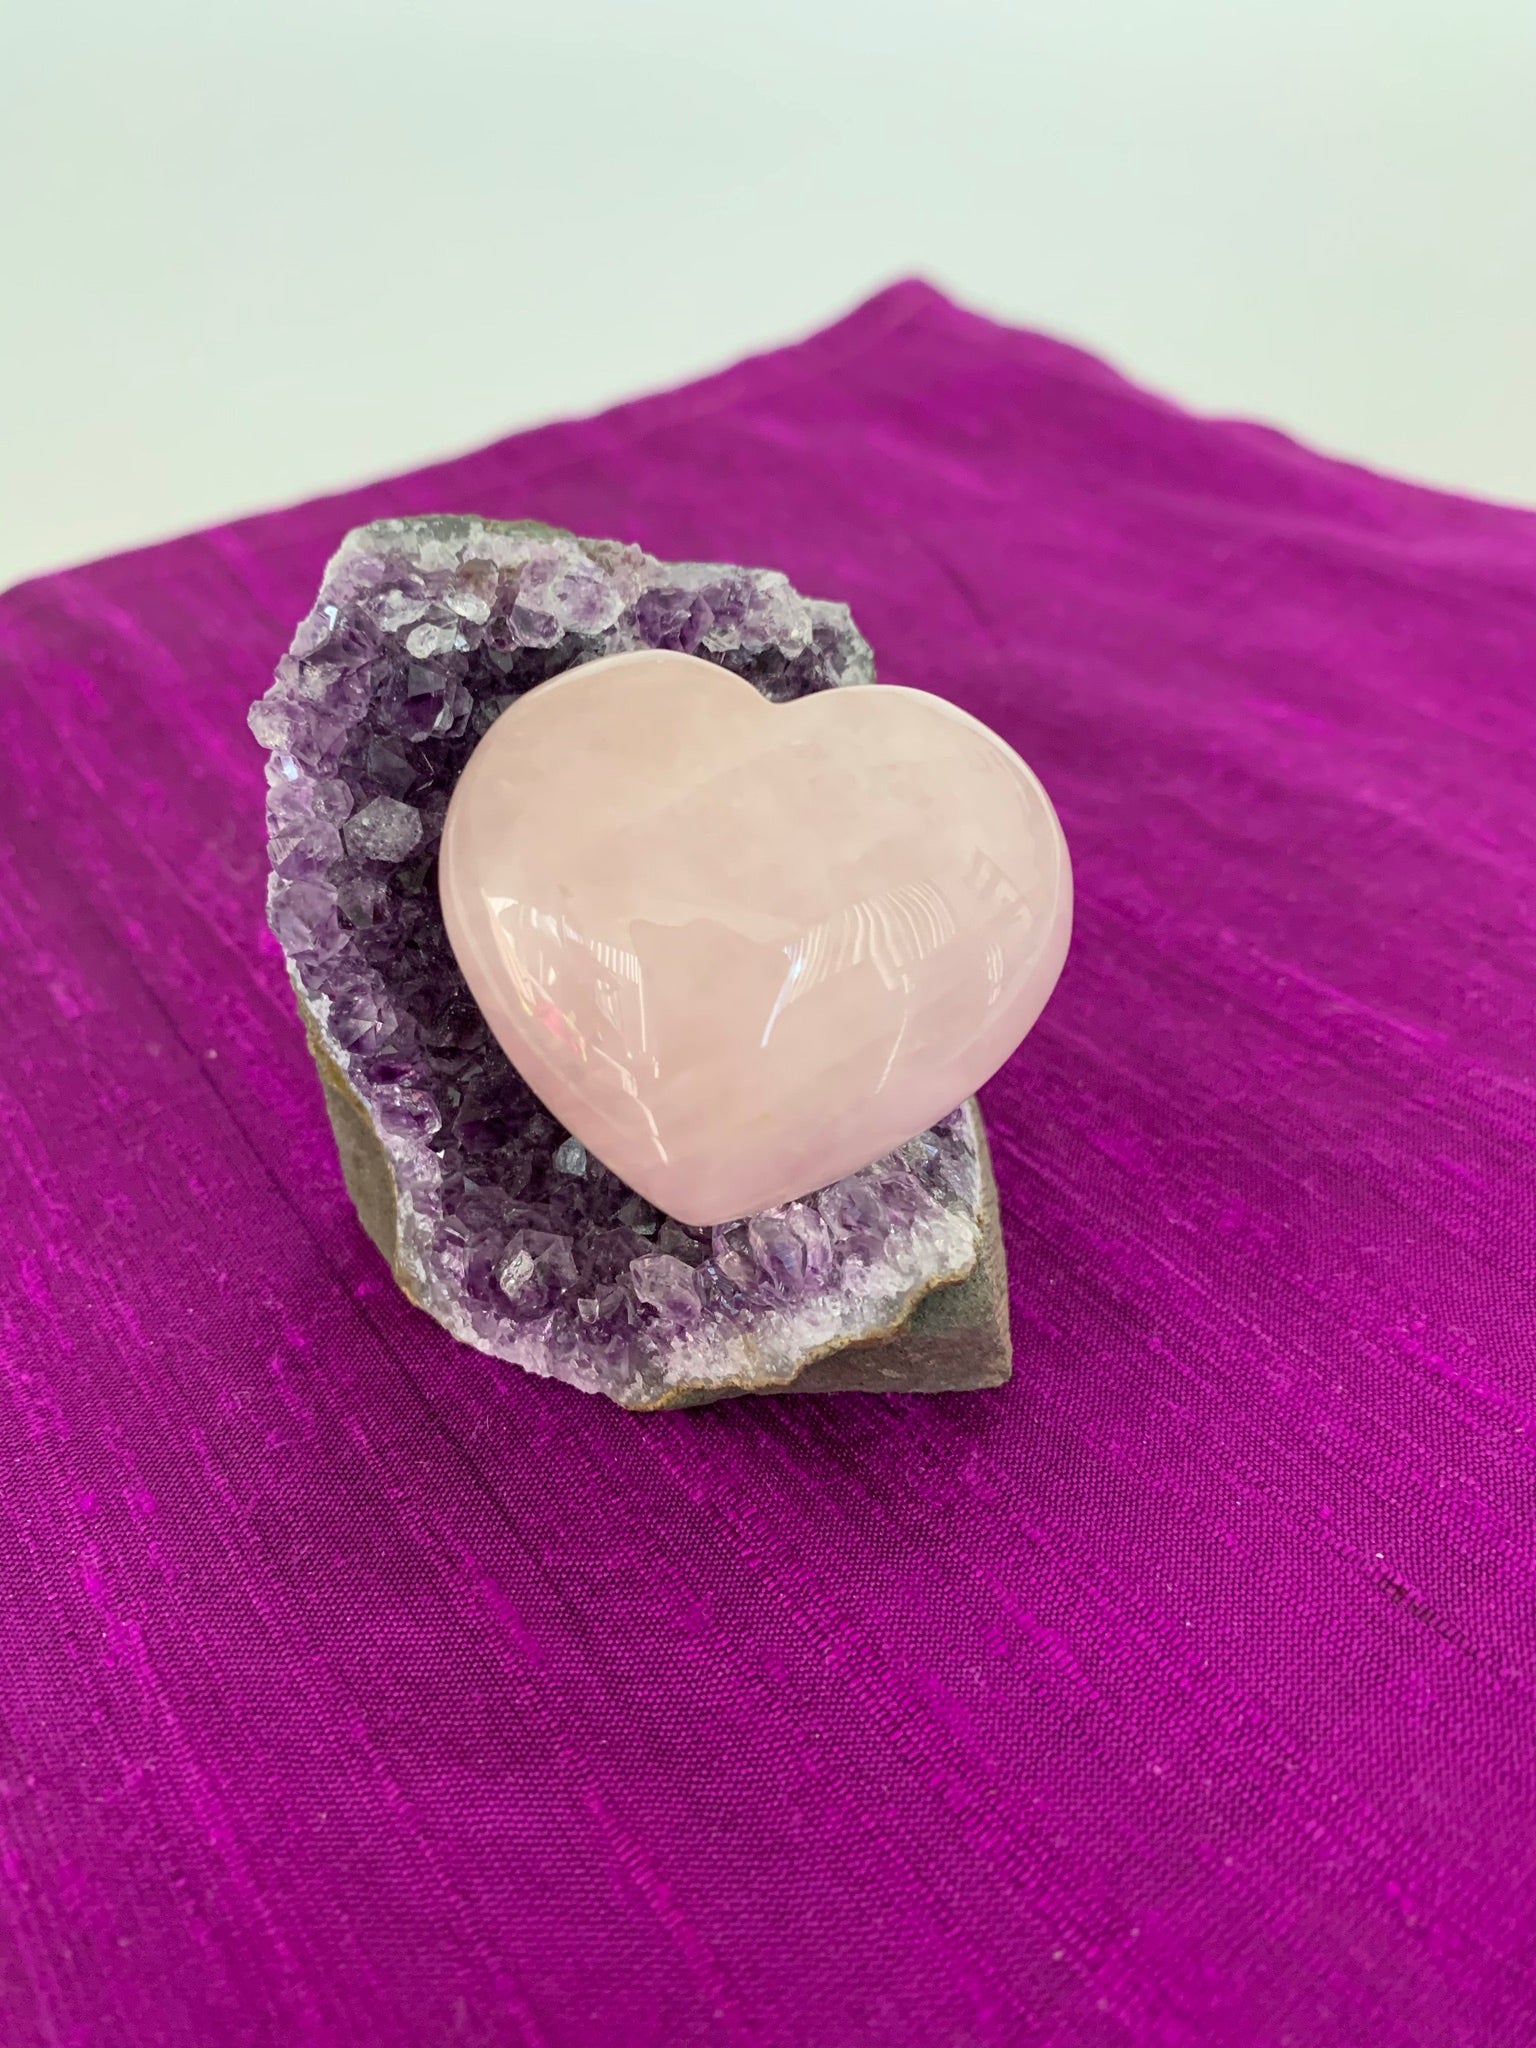 High quality Rose Quartz heart is perfect for your altar, meditation space or to hold while meditating, or anywhere you want to radiate the energy of love ♥.  A great gift too! Rose quartz is the "stone of unconditional love & infinite peace." It opens the heart and soothes emotional distress. Size is approximately 40mm.